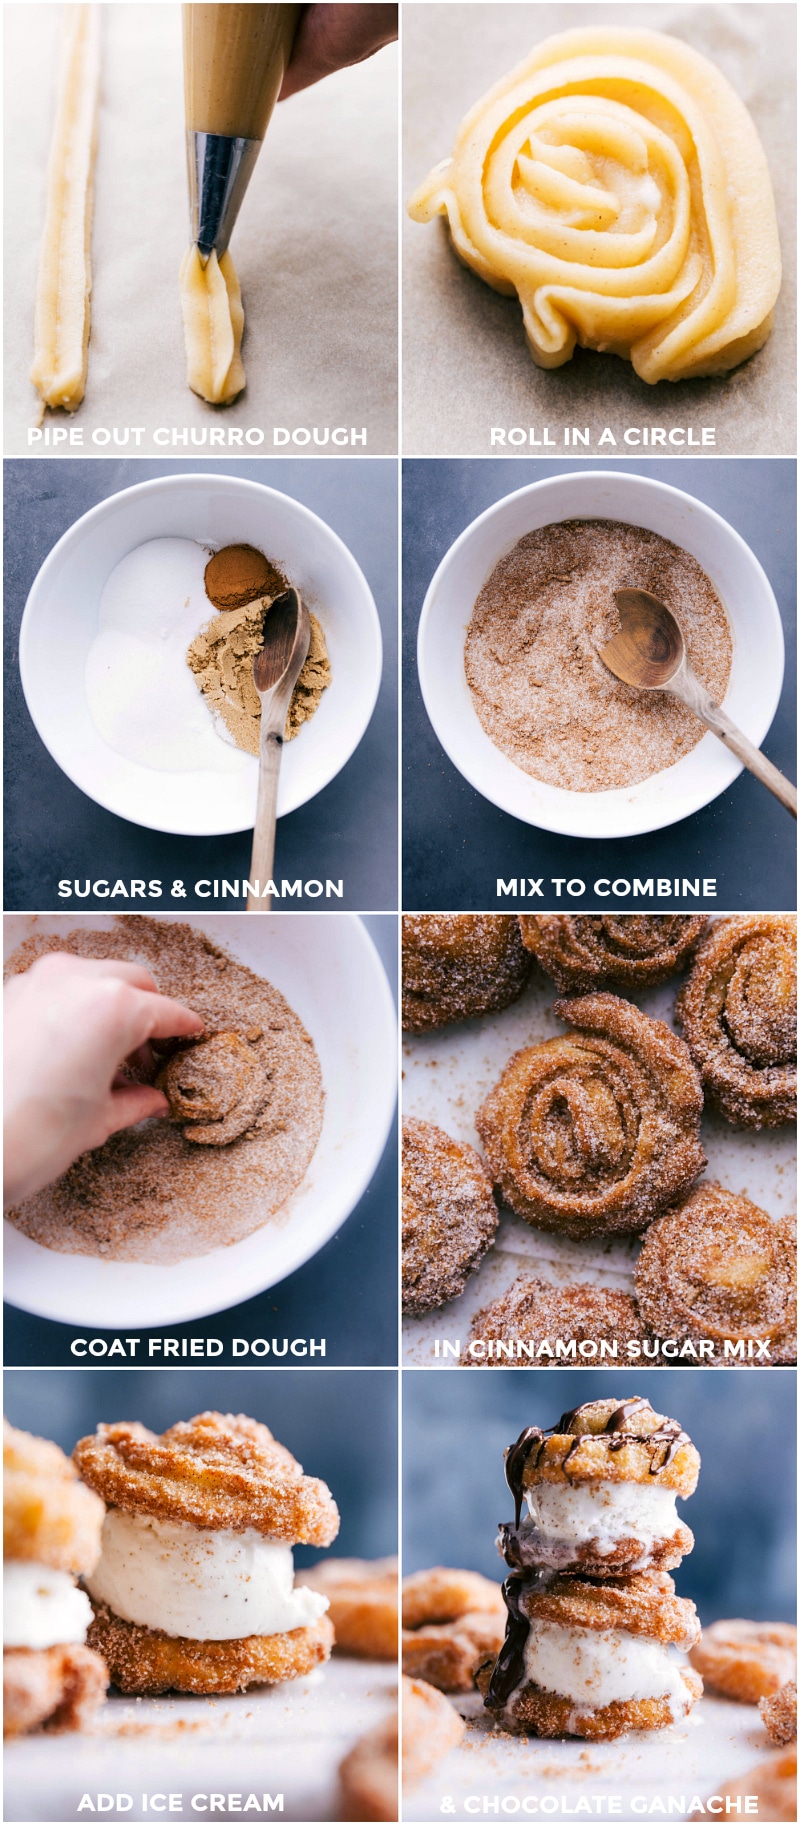 Process shots-- images of the dough being pipped out into a circle; the cinnamon sugar mixture being made; the fried dough being dipped in sugar; ice cream being added to the middle.